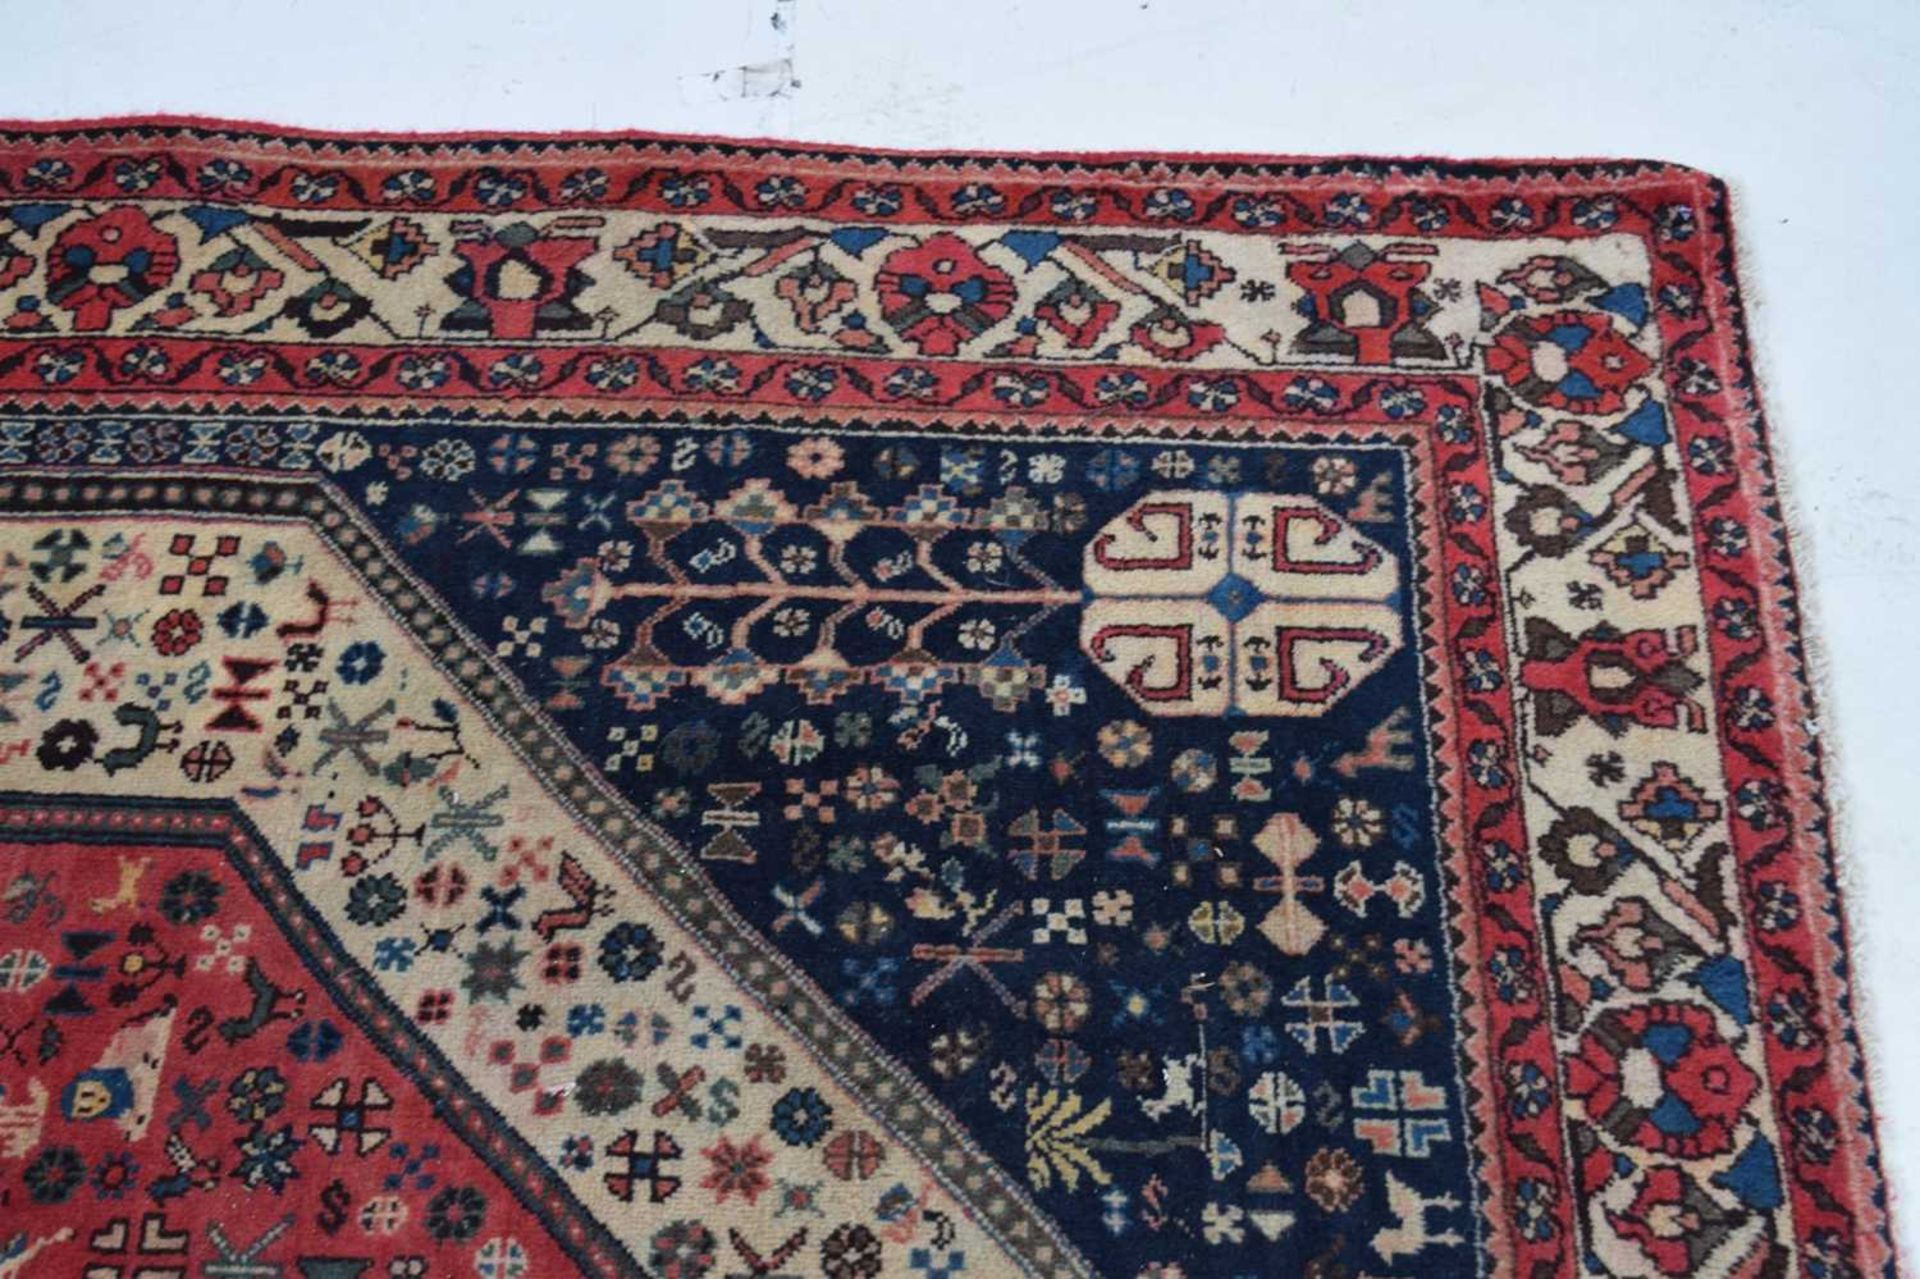 South West Persian Abadeh carpet - Image 6 of 12